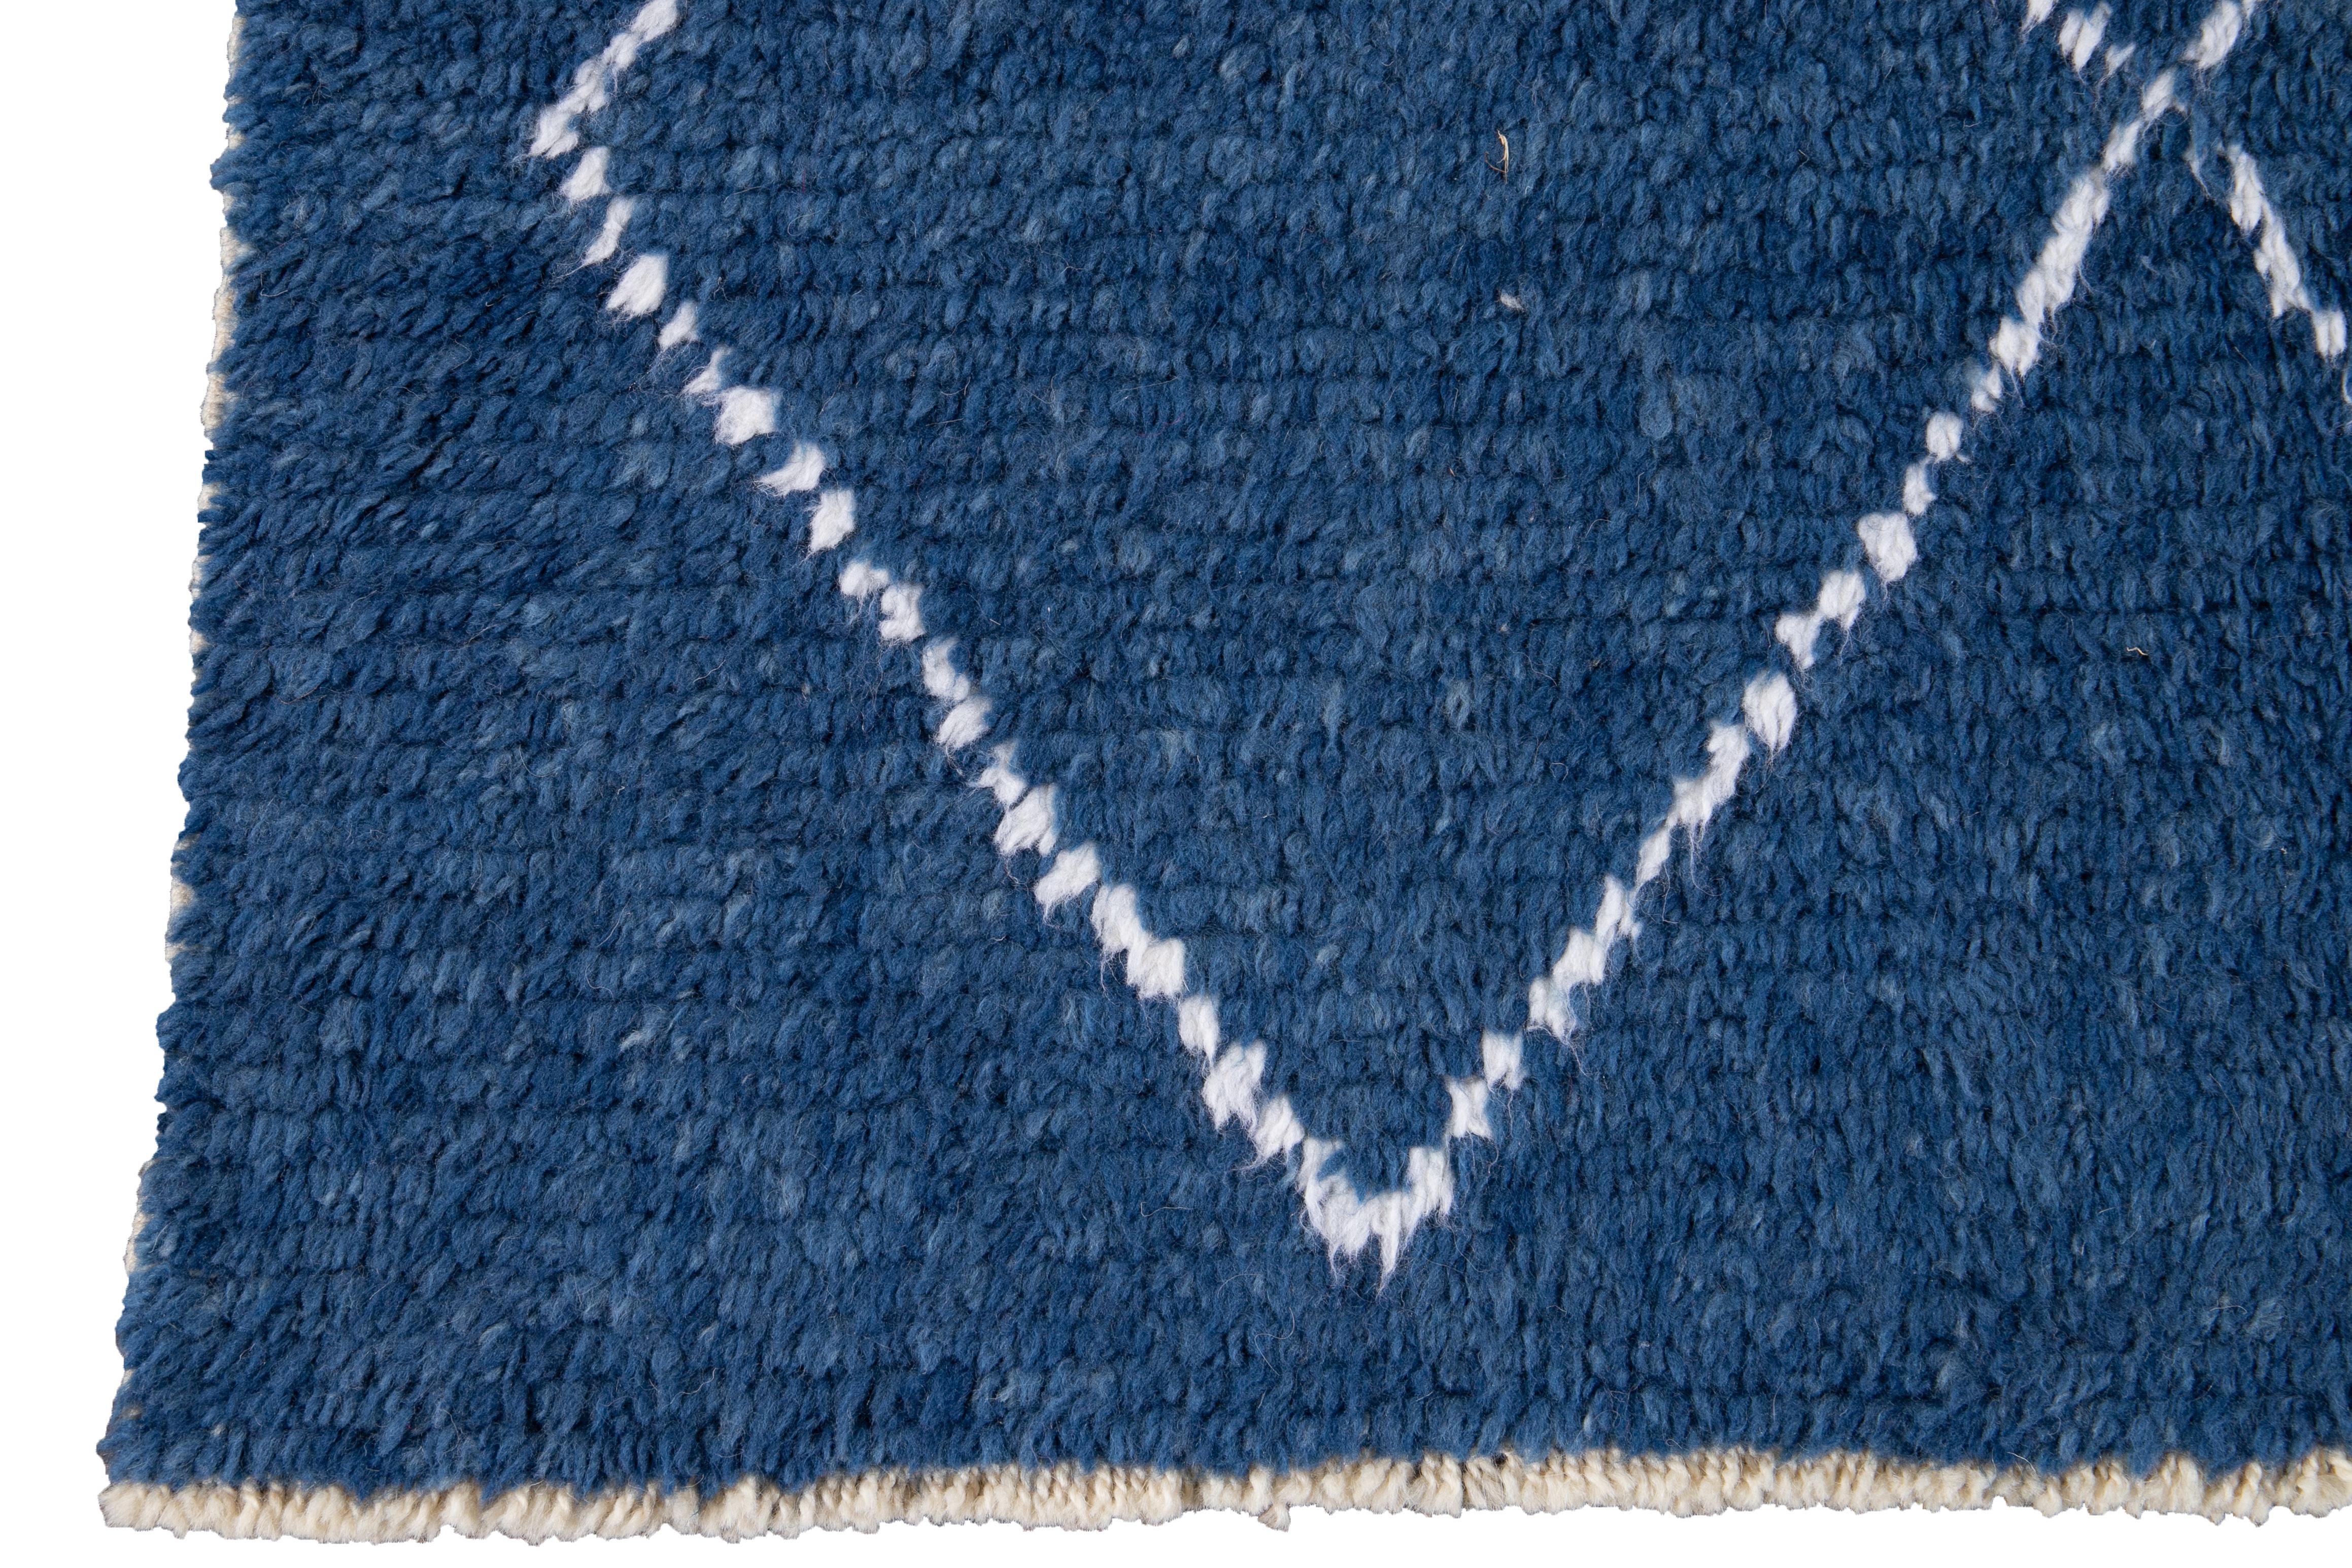 Modern Moroccan Tribal Style Square Wool Rug Handmade in Blue In New Condition For Sale In Norwalk, CT